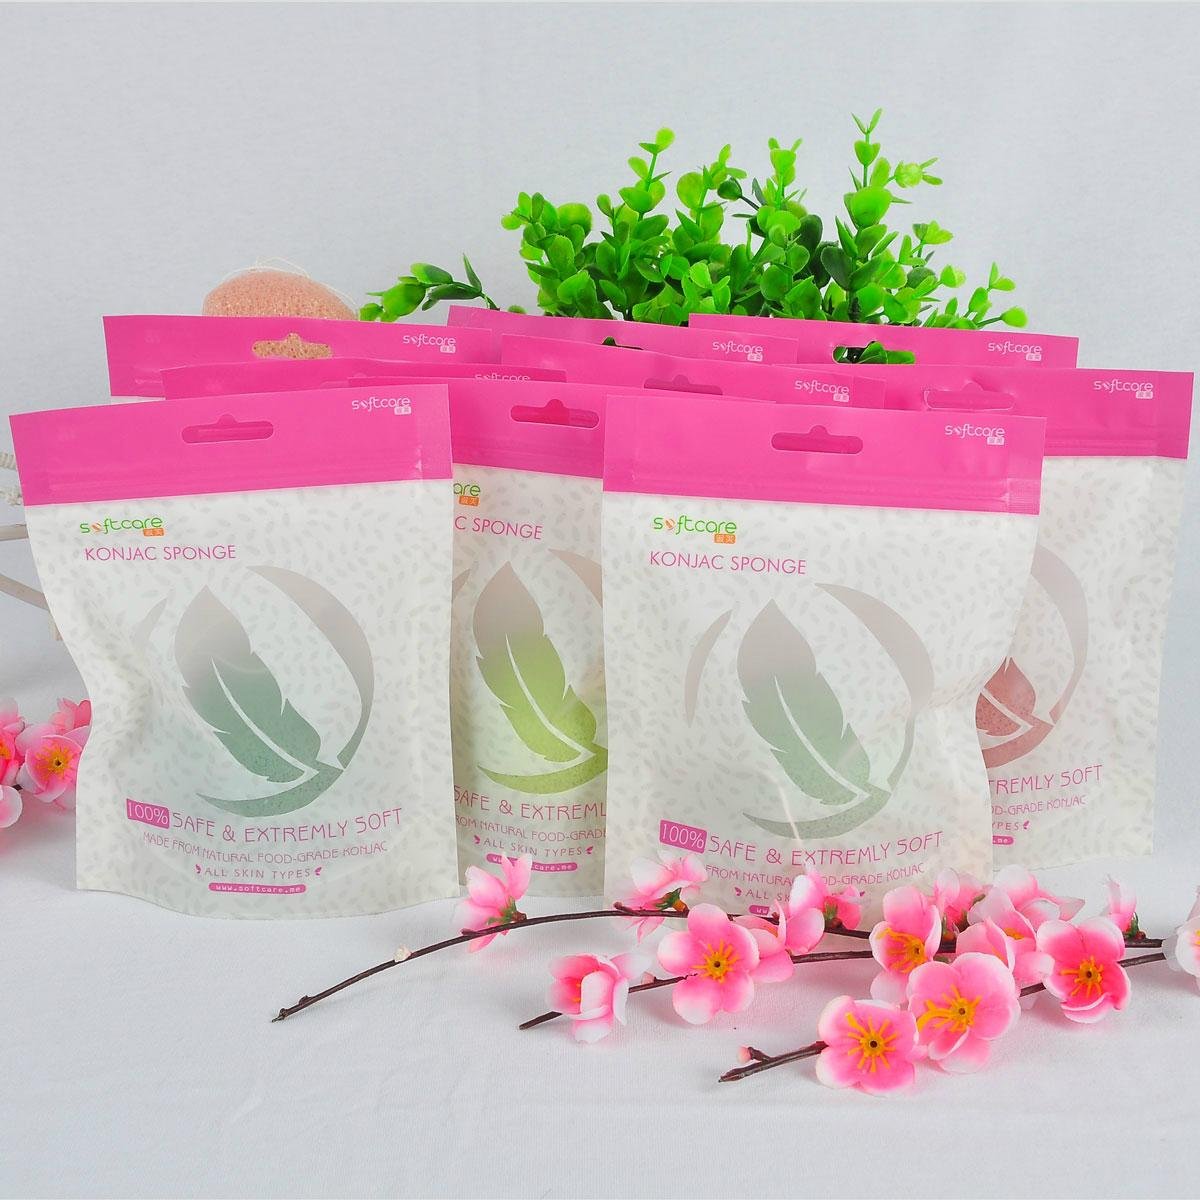 SOFTCARE round cake type 100% natural facial cleansing konjac sponge 5